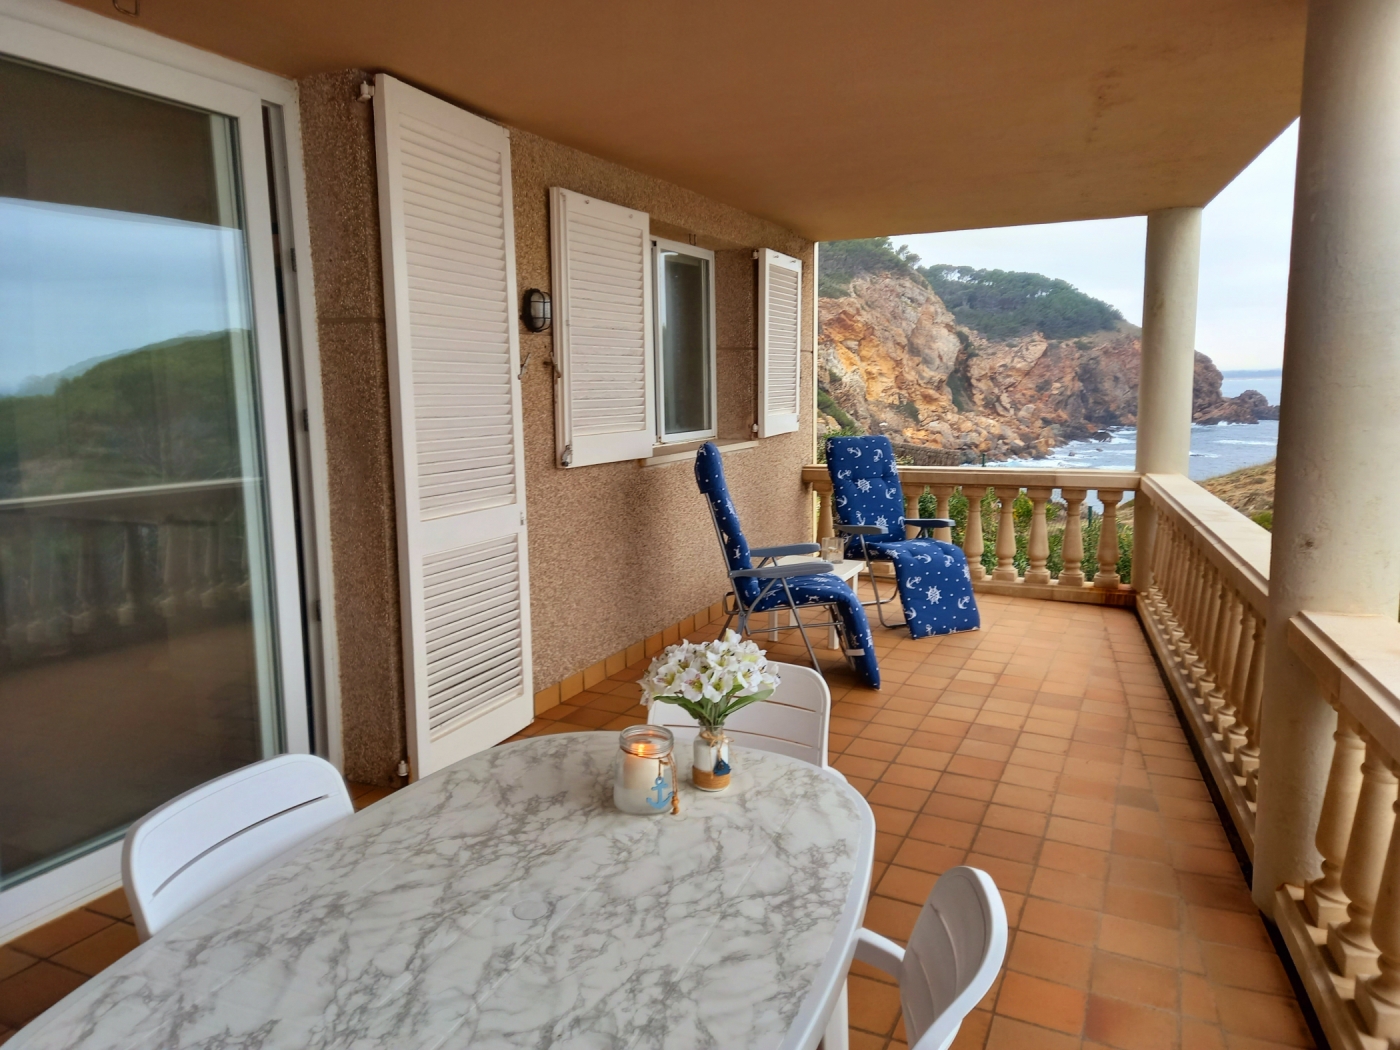 Beachfront apartment with pool in Begur